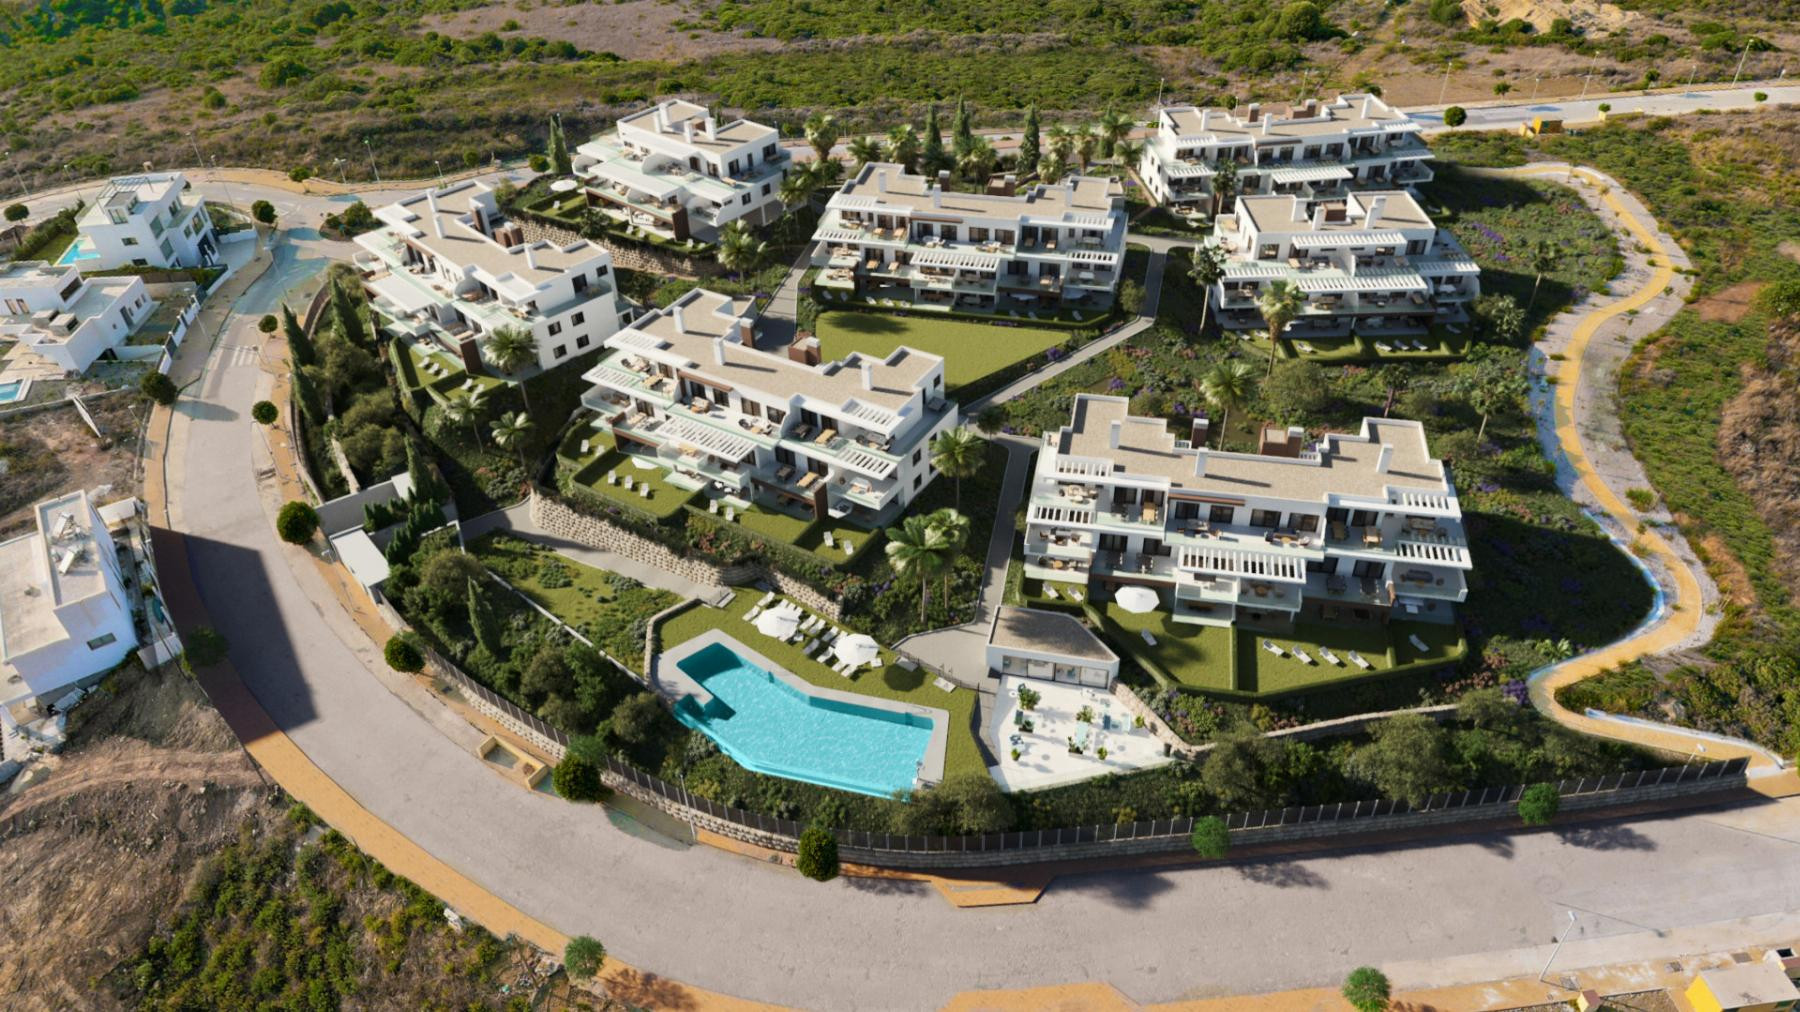 Azata Delmare: Apartments with 2 and 3 bedrooms with ocean view in Casares Costa.